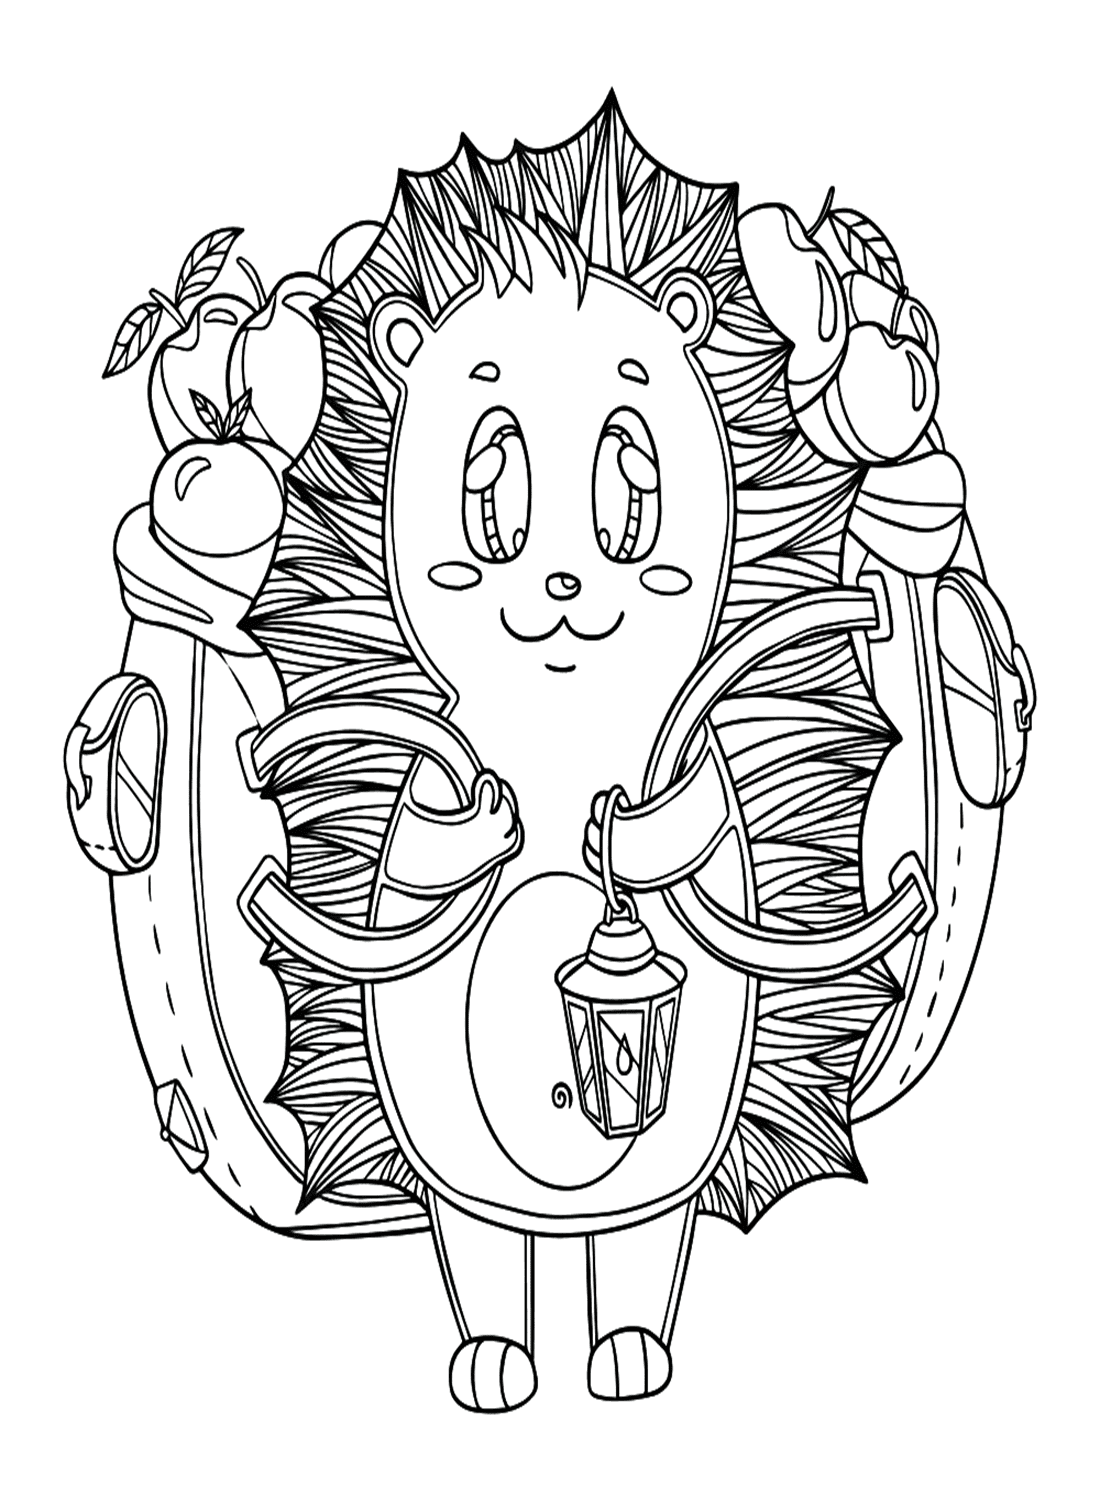 Cartoon Porcupine Coloring Page from Porcupine